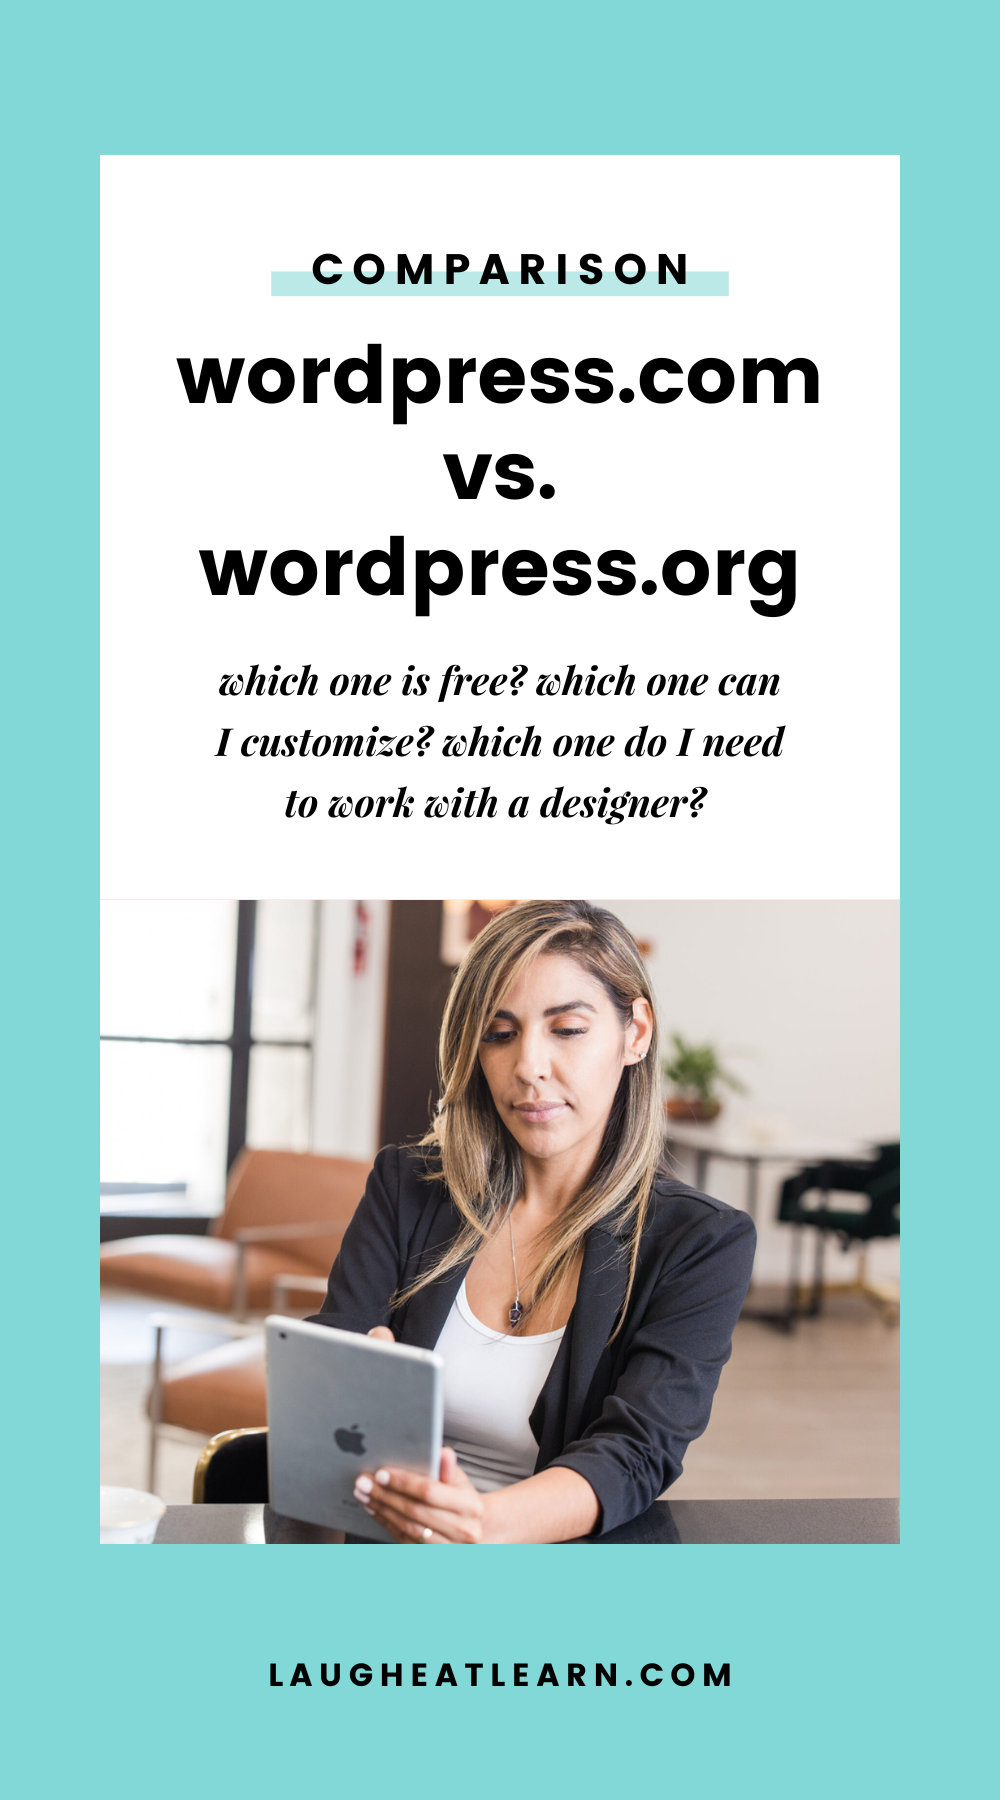 Ready to start a WordPress site…but utterly confused at the difference between WordPress.com vs WordPress.org? Good news is, you are far from alone. This is one of the most common questions I get as a WordPress designer. Luckily, there is a clear difference between the two, and once you understand it, you can choose the best site for you.